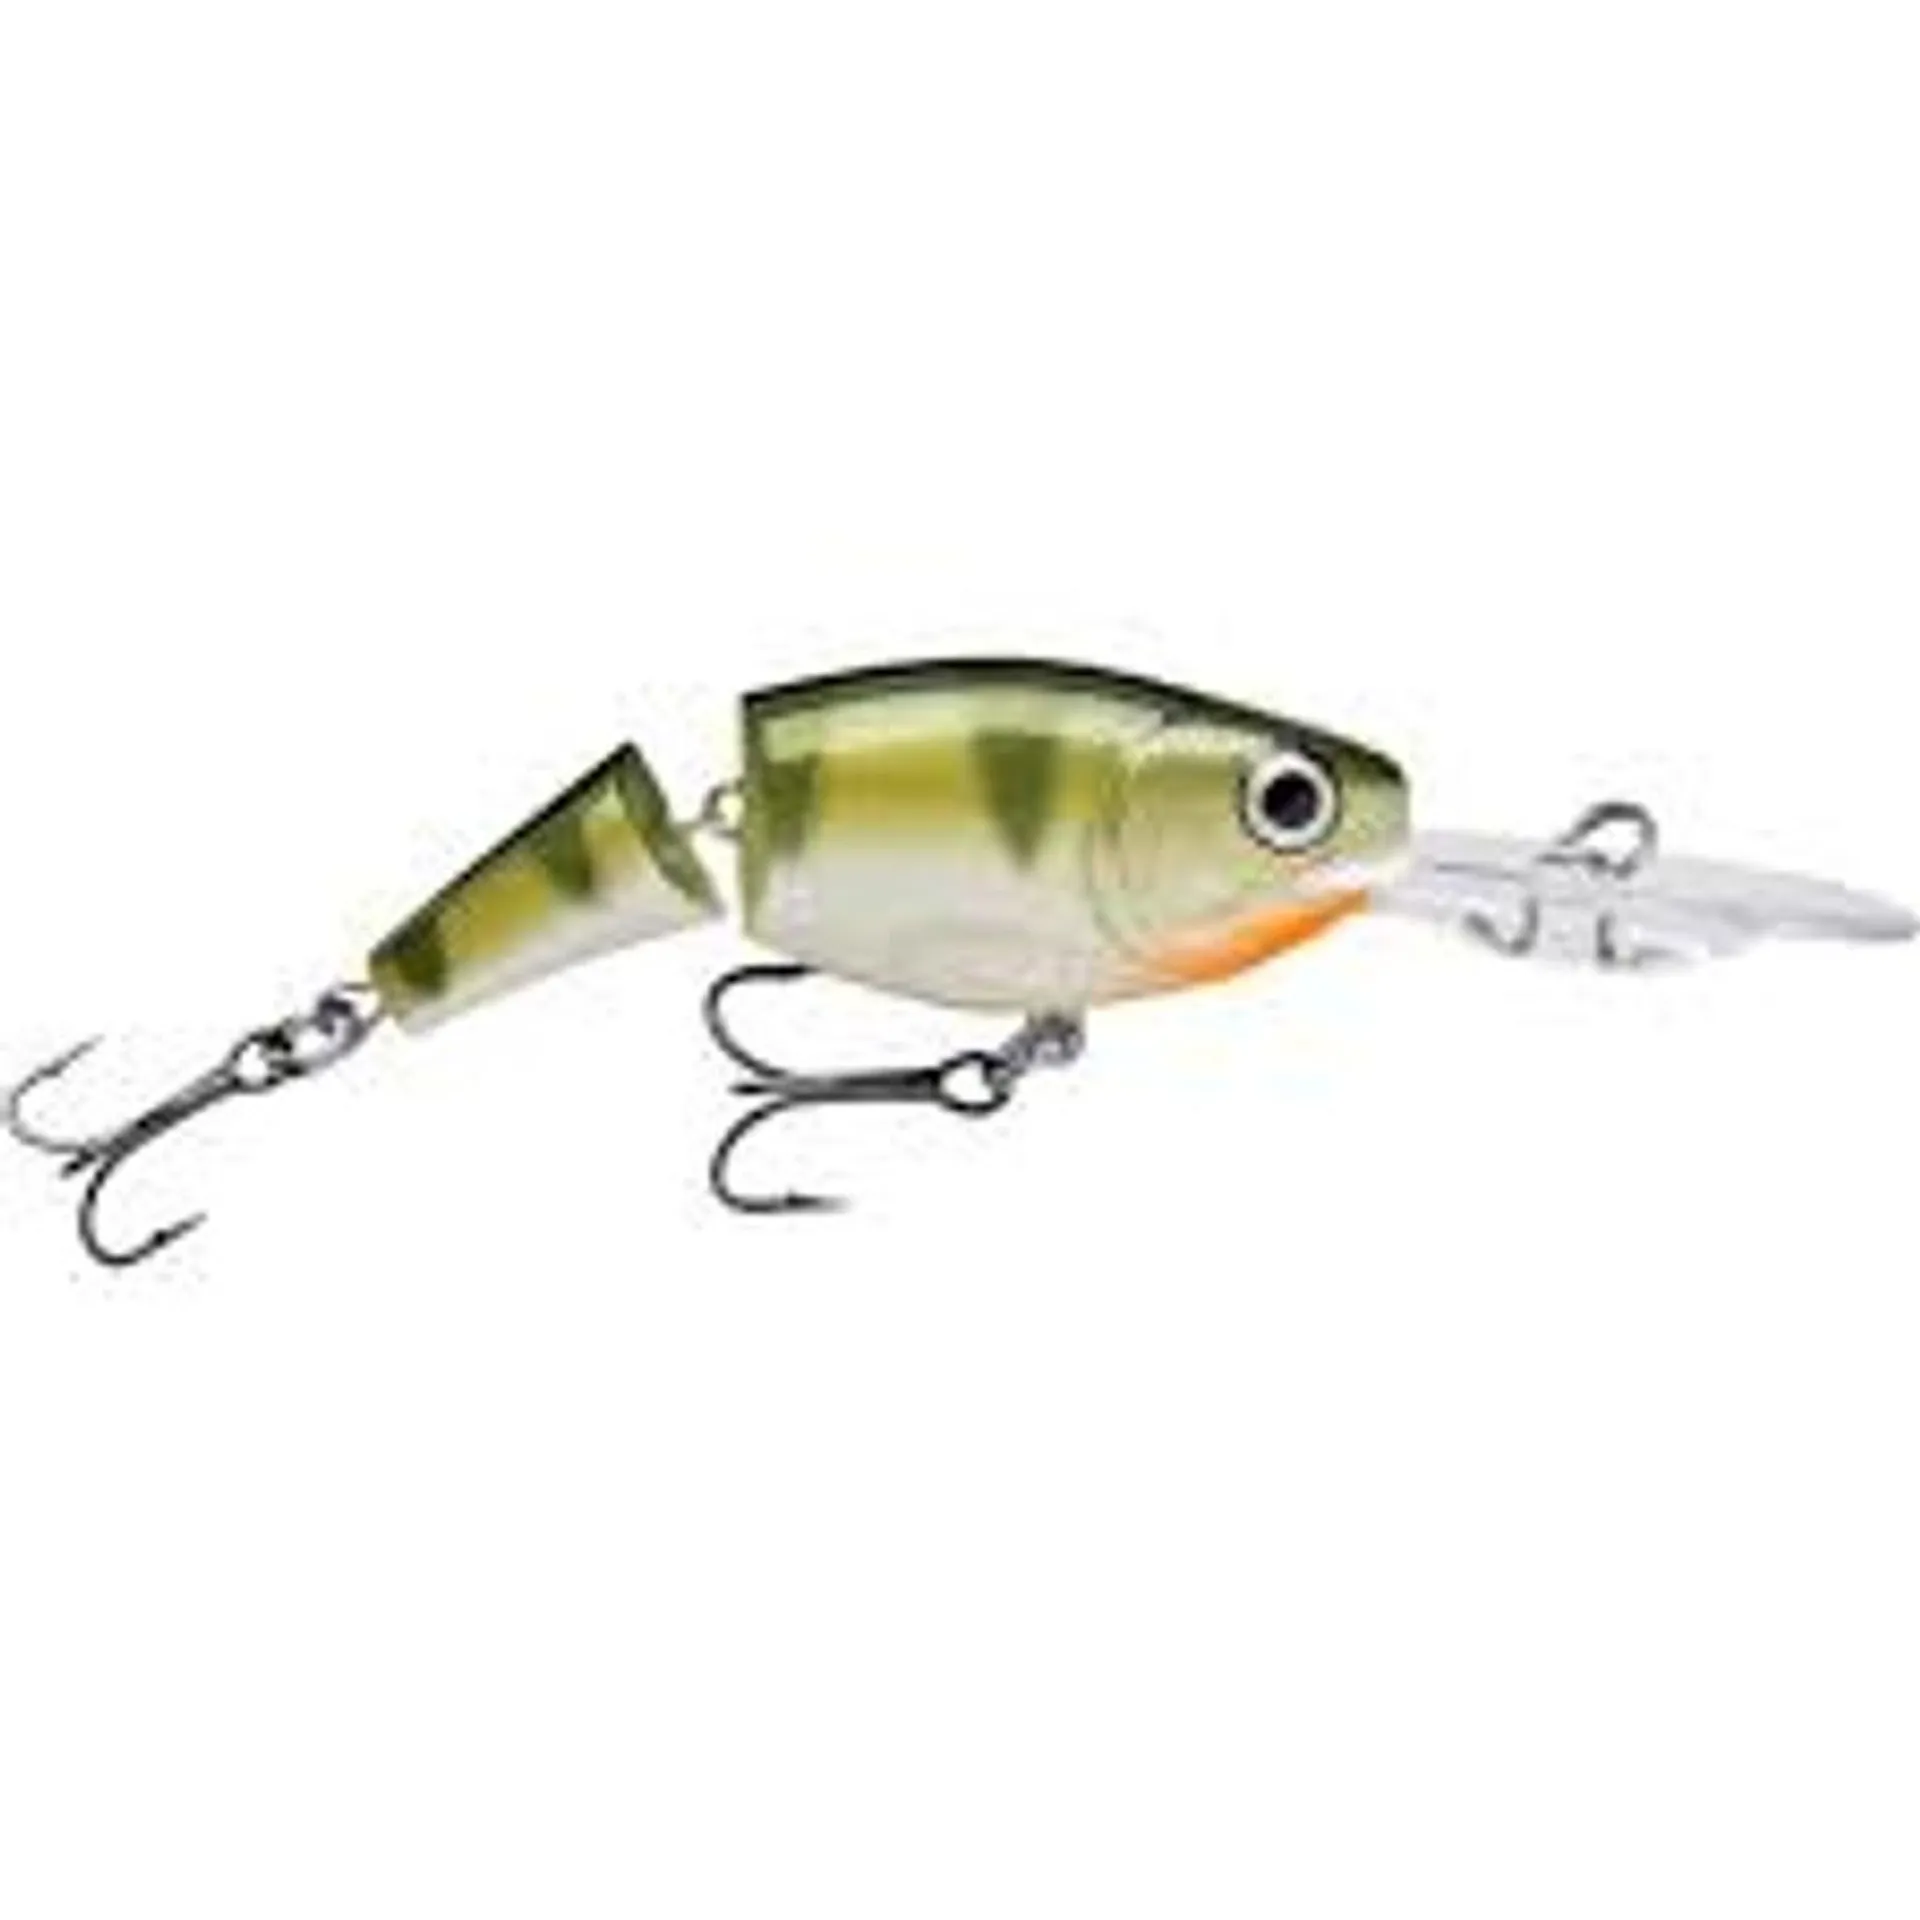 Rapala 5cm Jointed Shad Rap Lure Yellow Perch